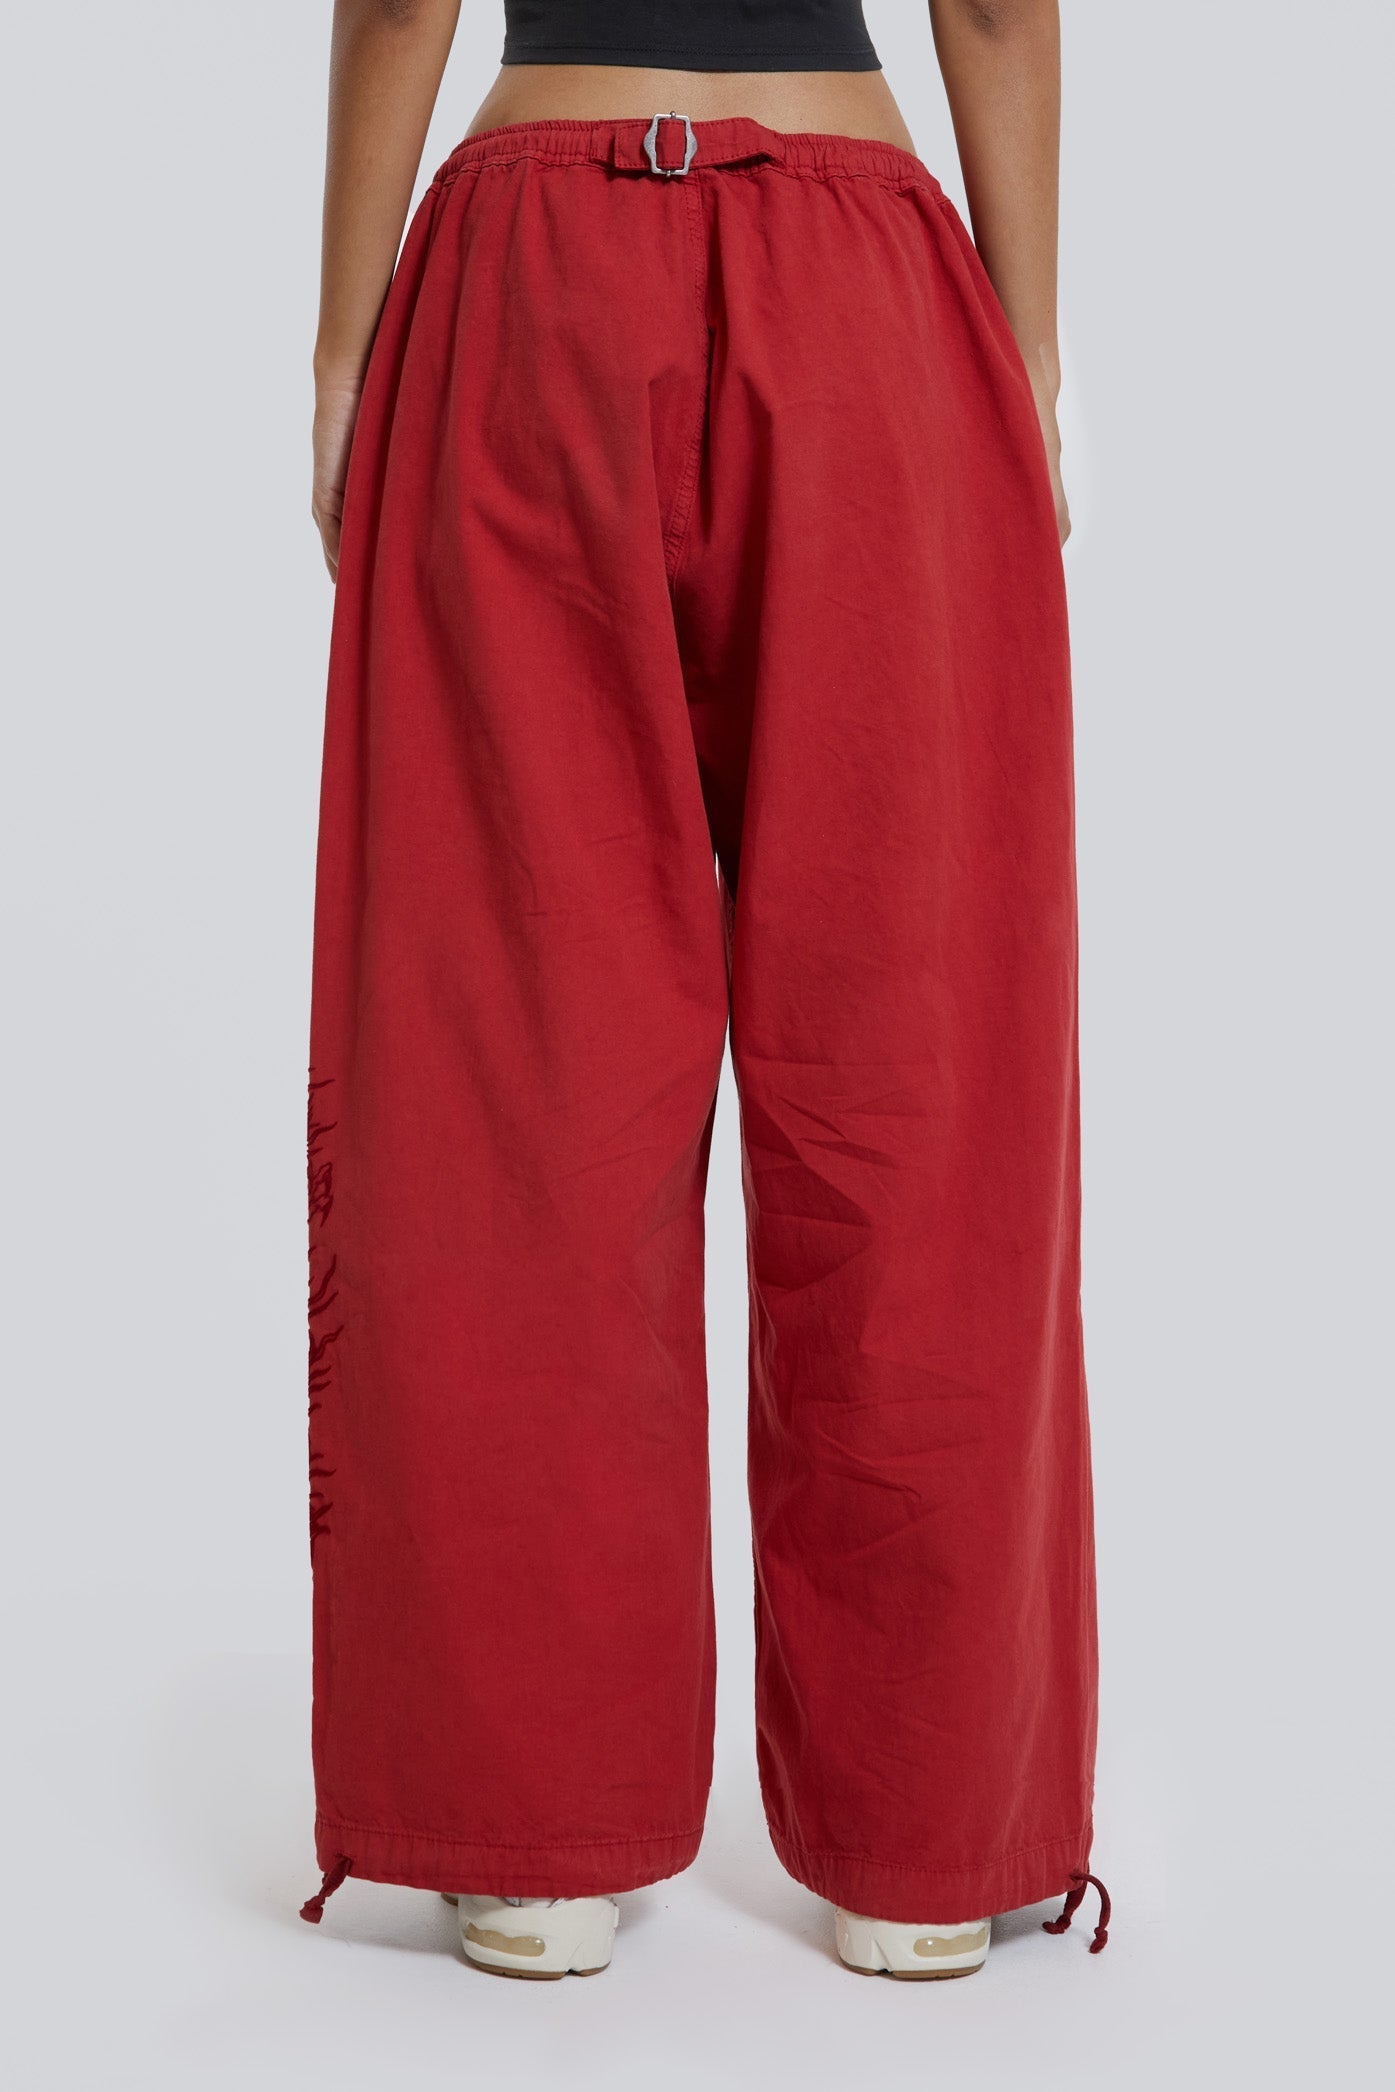 Red Military Cargo Pants With Flock Print | Jaded London